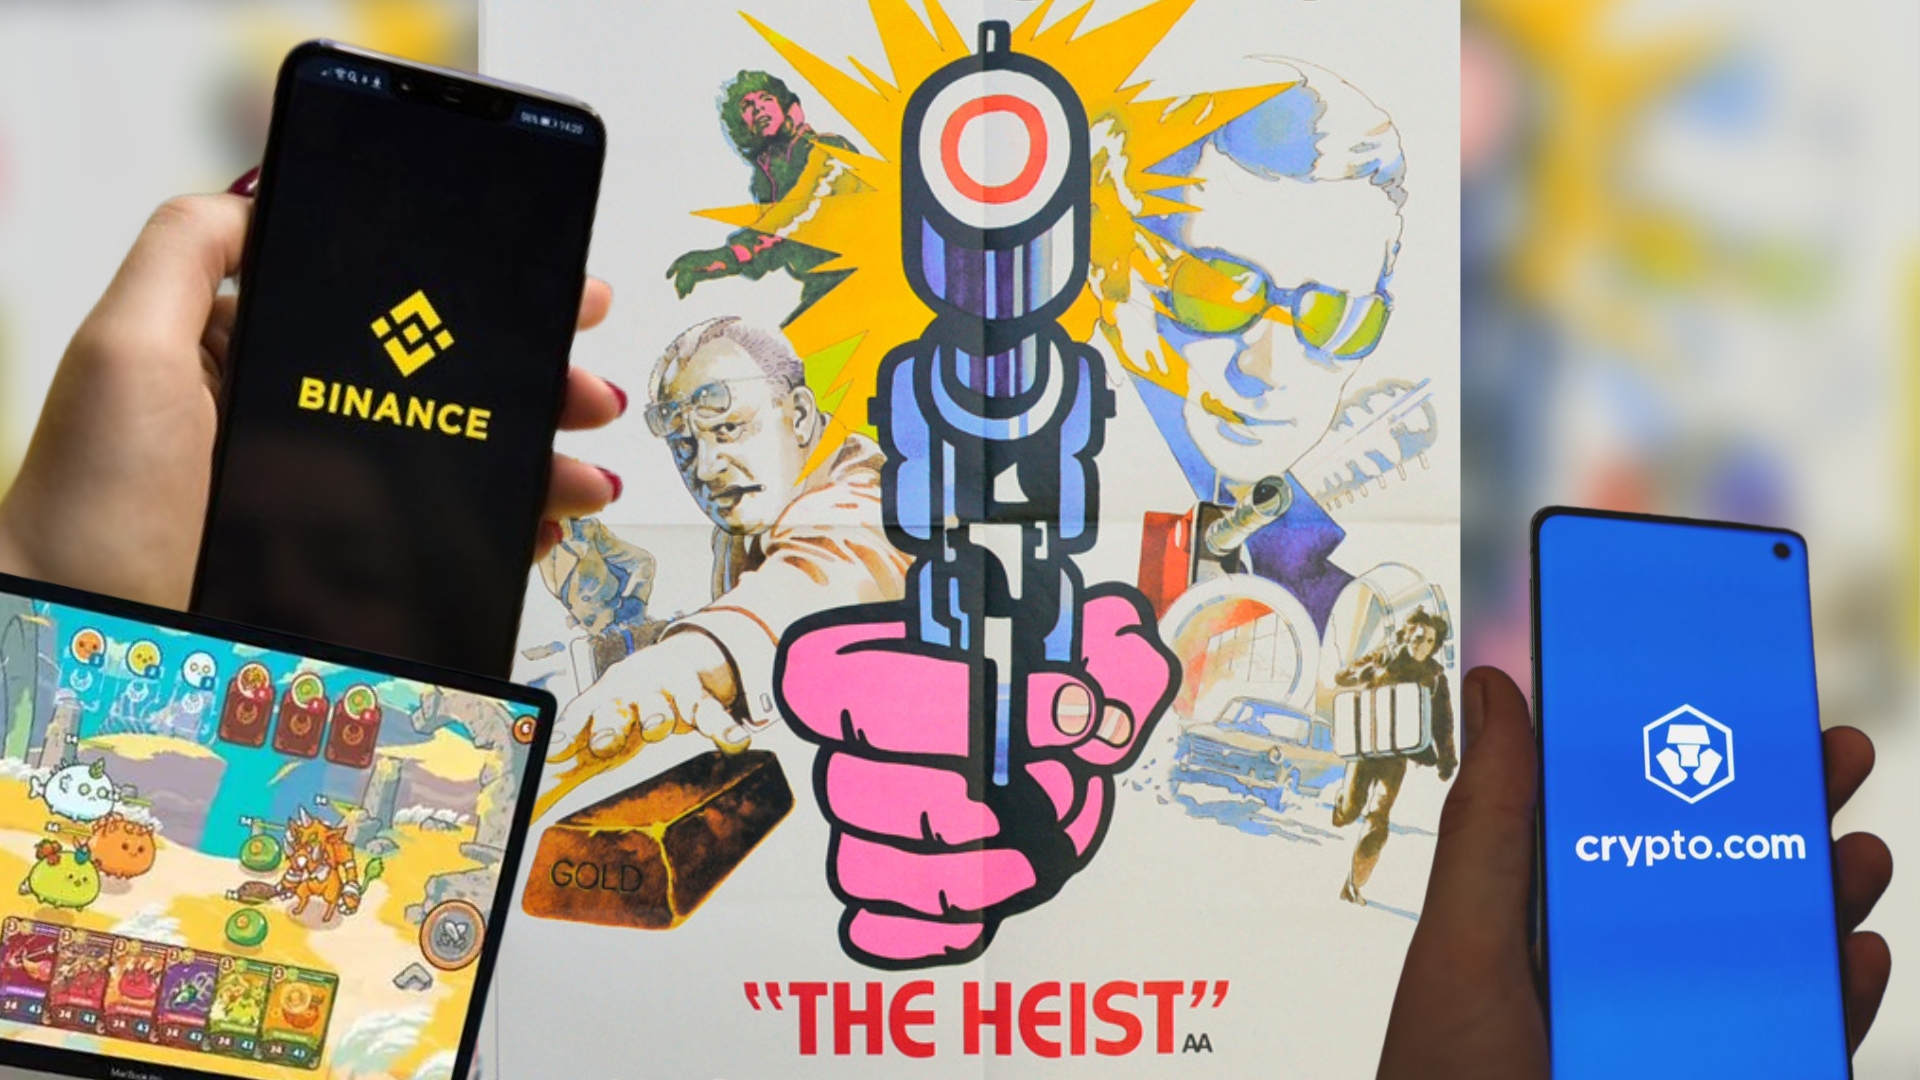 Mock film poster for 'The Heist' featuring images of recently hacked crypto orgs